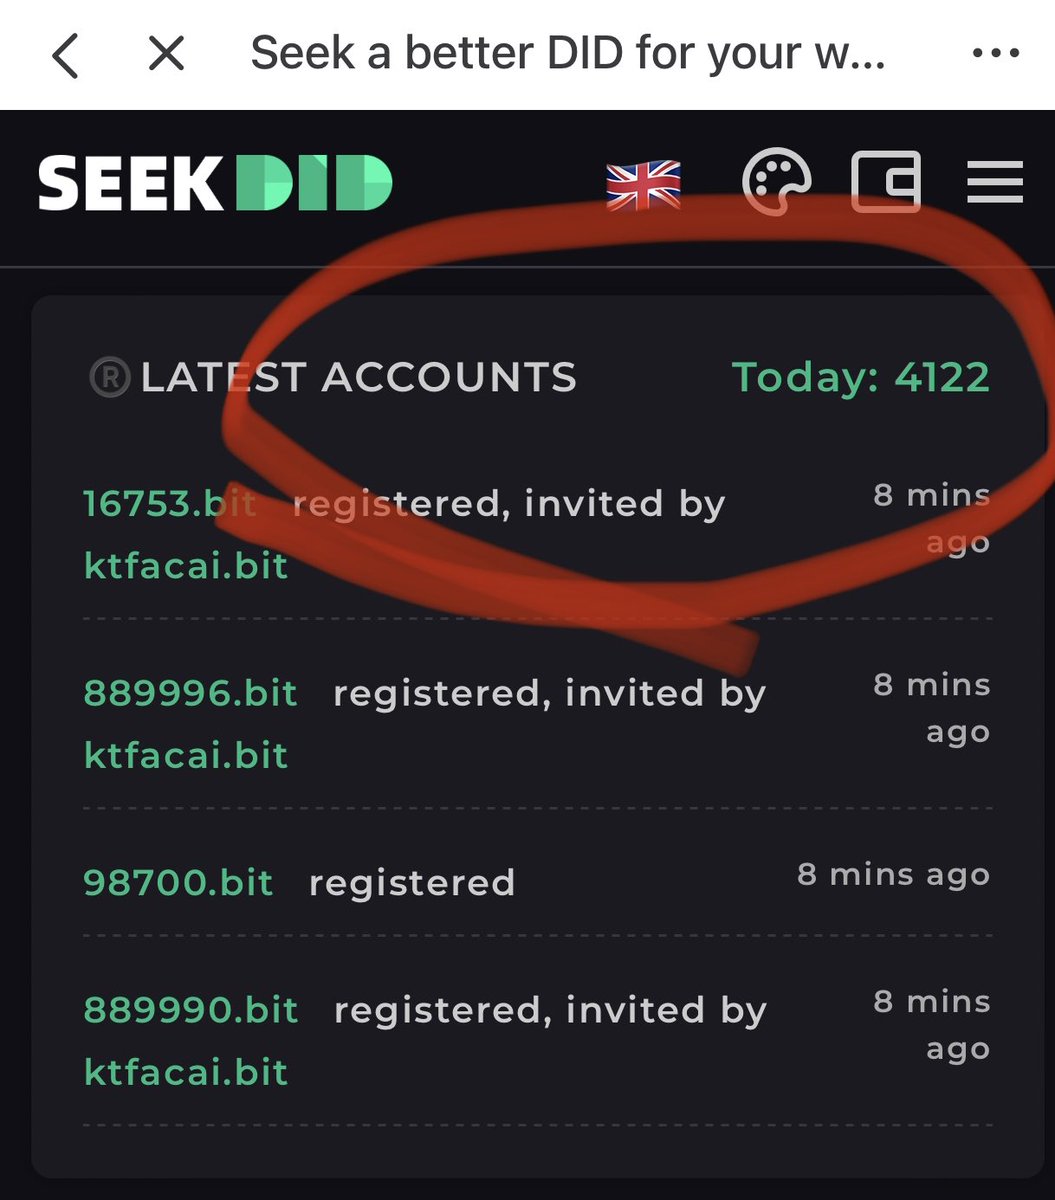 The daily registration data of .bit accounts reached a new record. Build #DID, LFG🚀🚀🚀 Thanks for the on-chain data support provided by @seekdid.